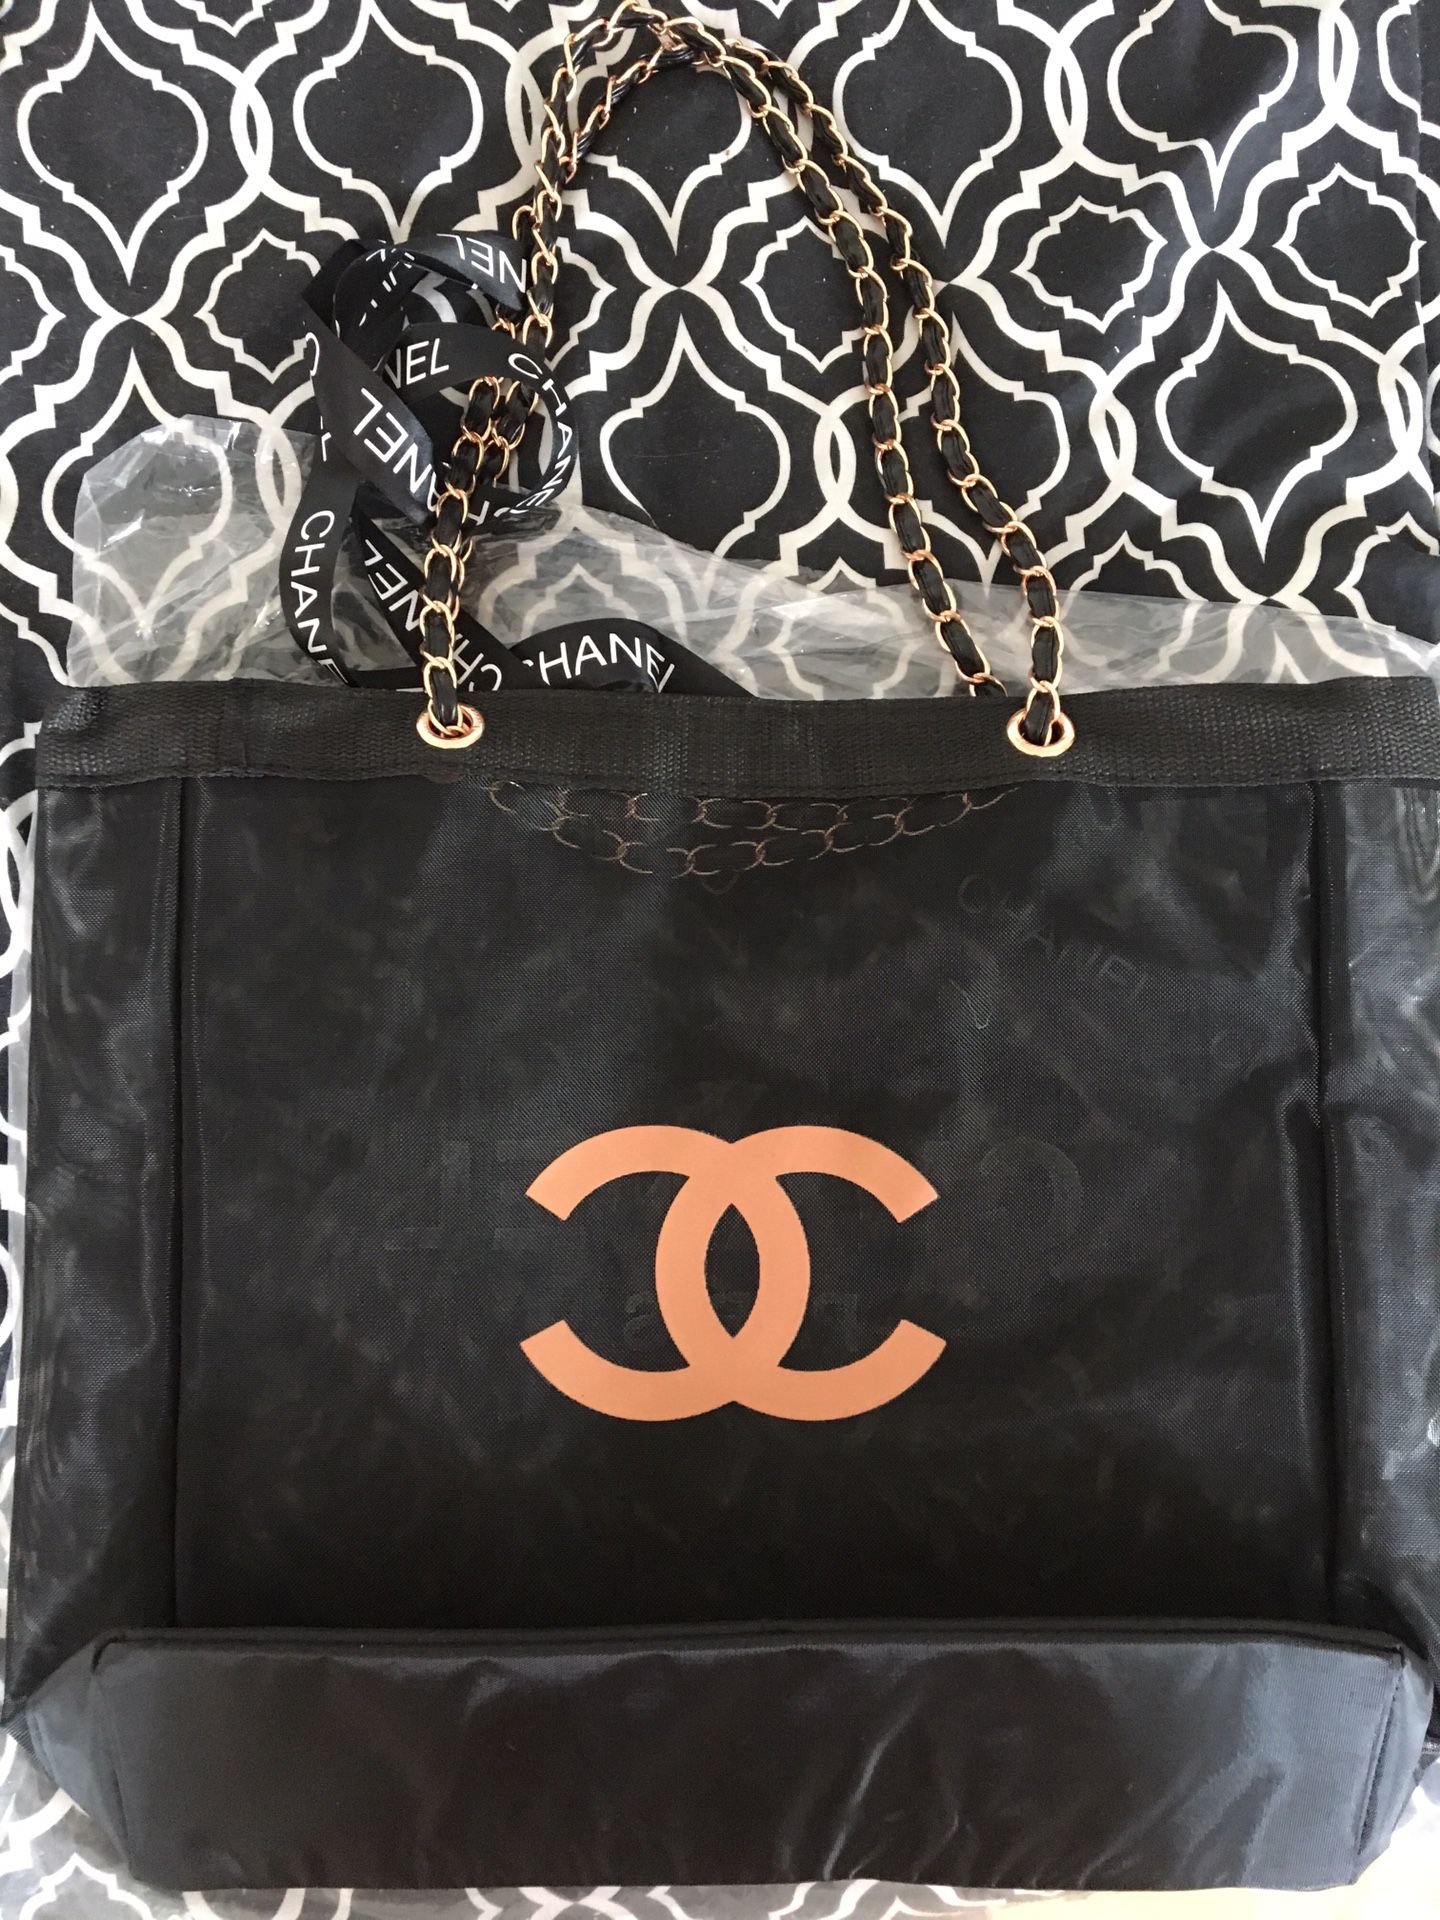 ONLY 2 LEFT* Authentic VIP GIFT Chanel Mesh Tote! for Sale in